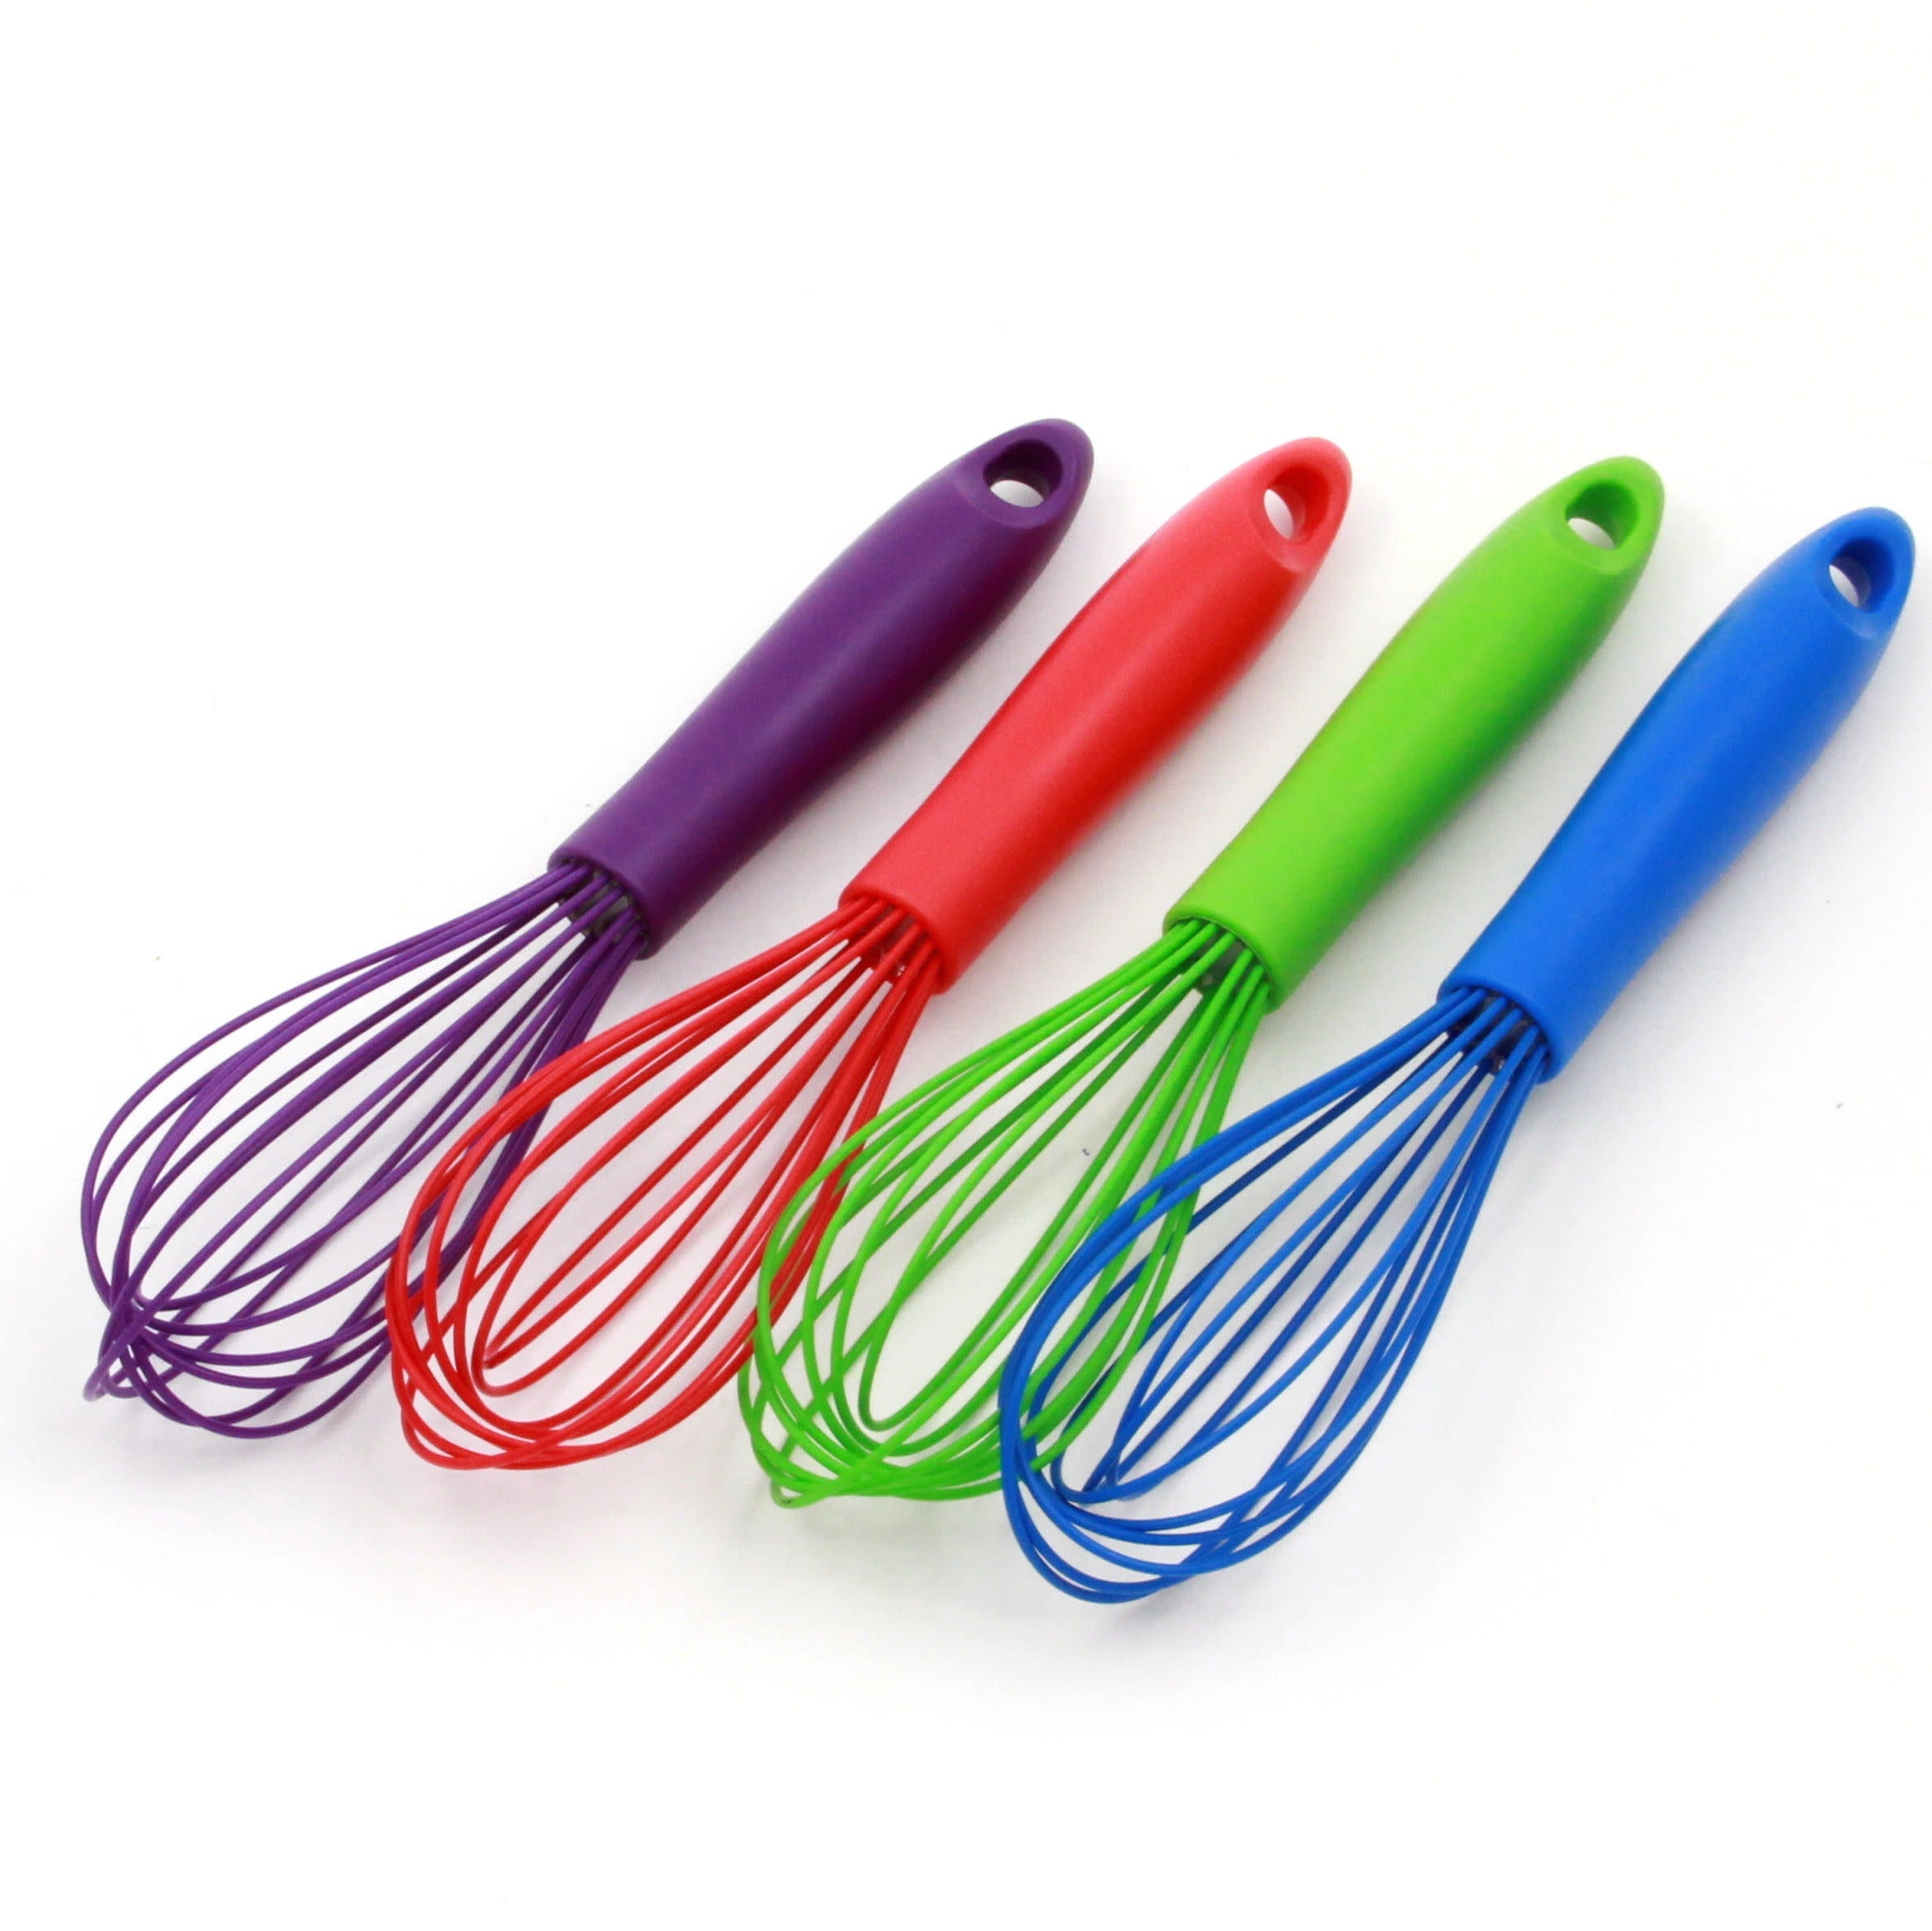 Cuisipro 10 Twist Whisk - Red